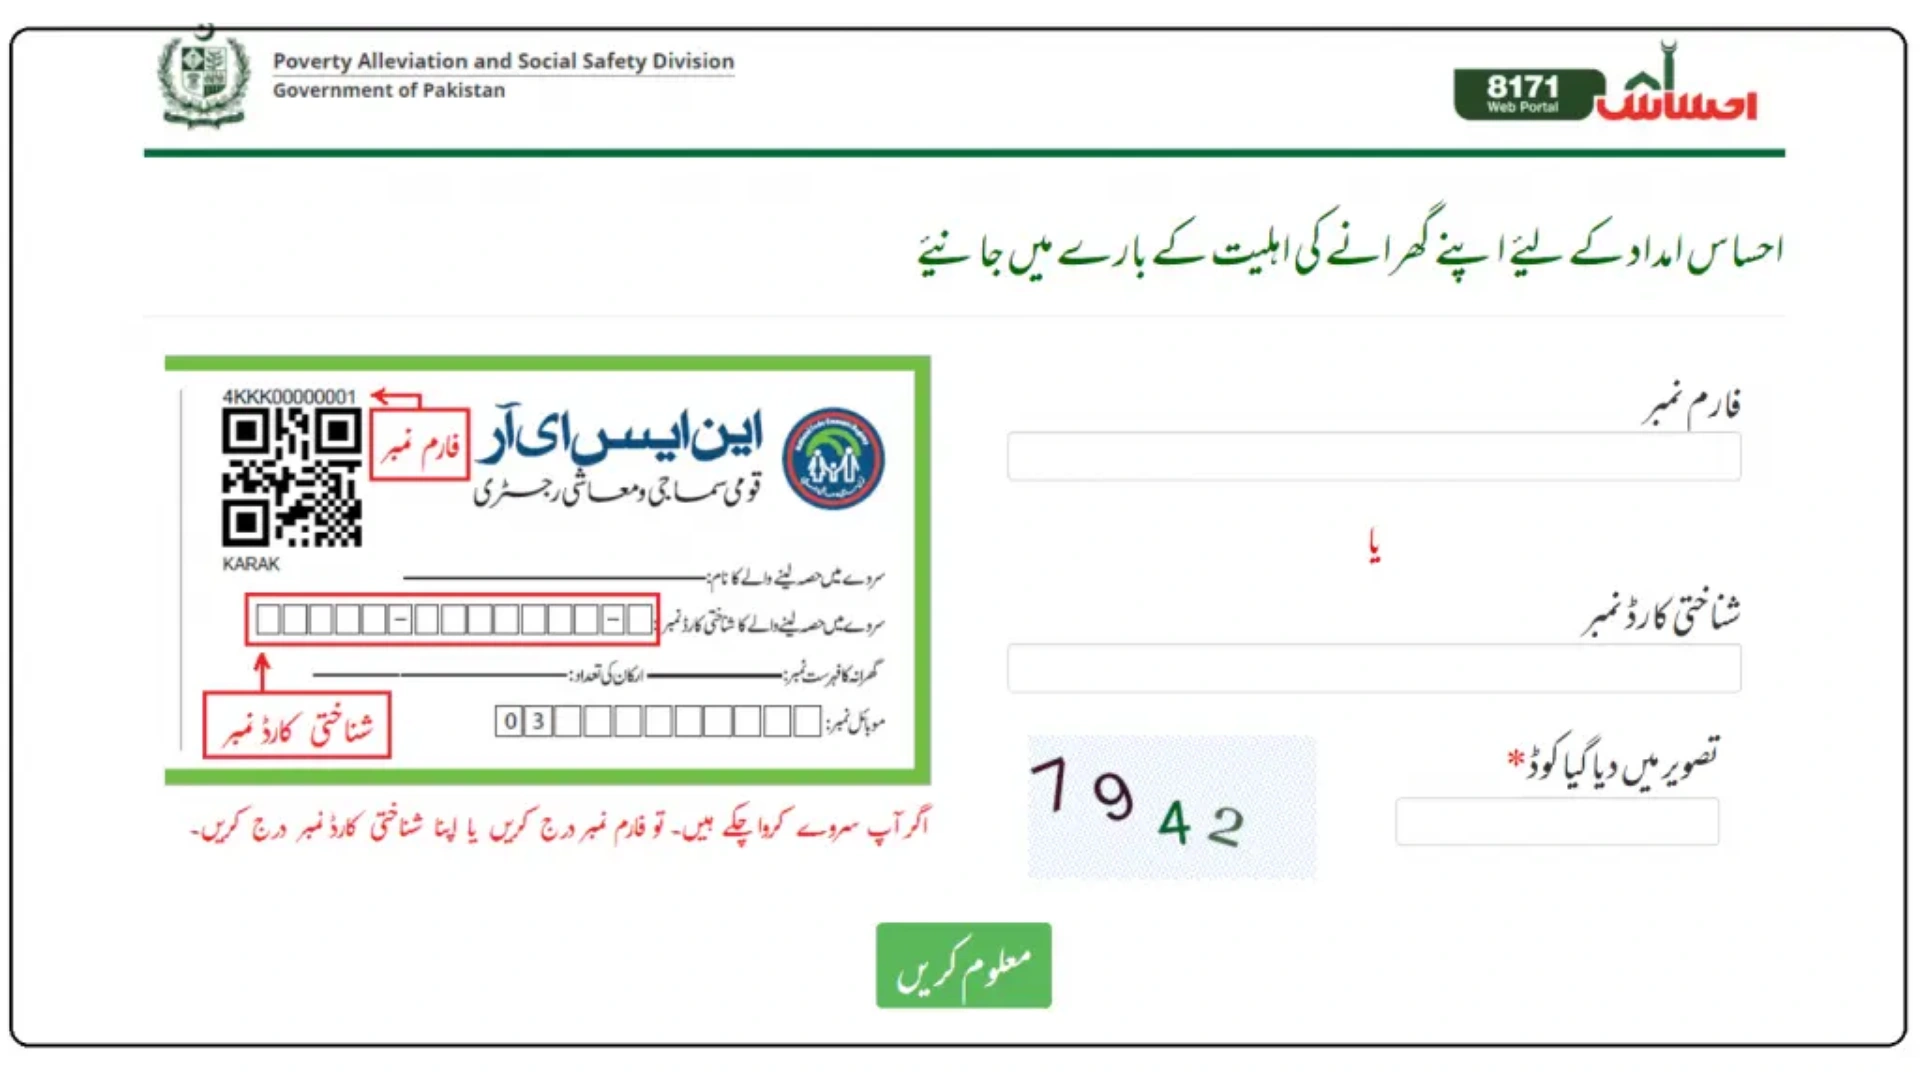 Online tracking for Ehsaas program